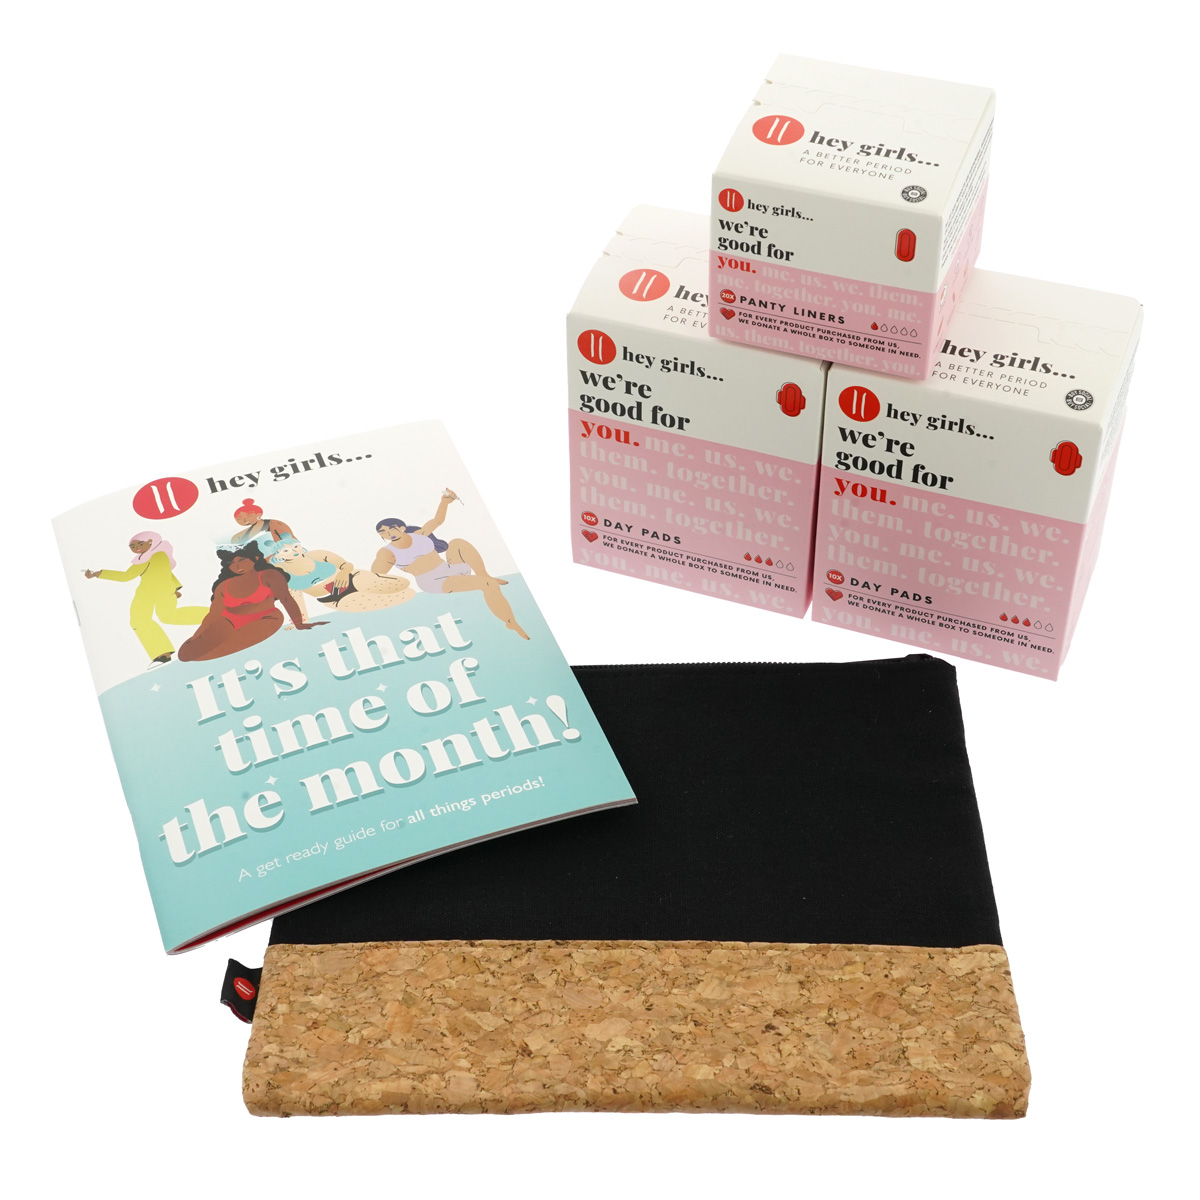 Hey Girls First Period Kit Pads & Panty Liners - Black Cork Bag